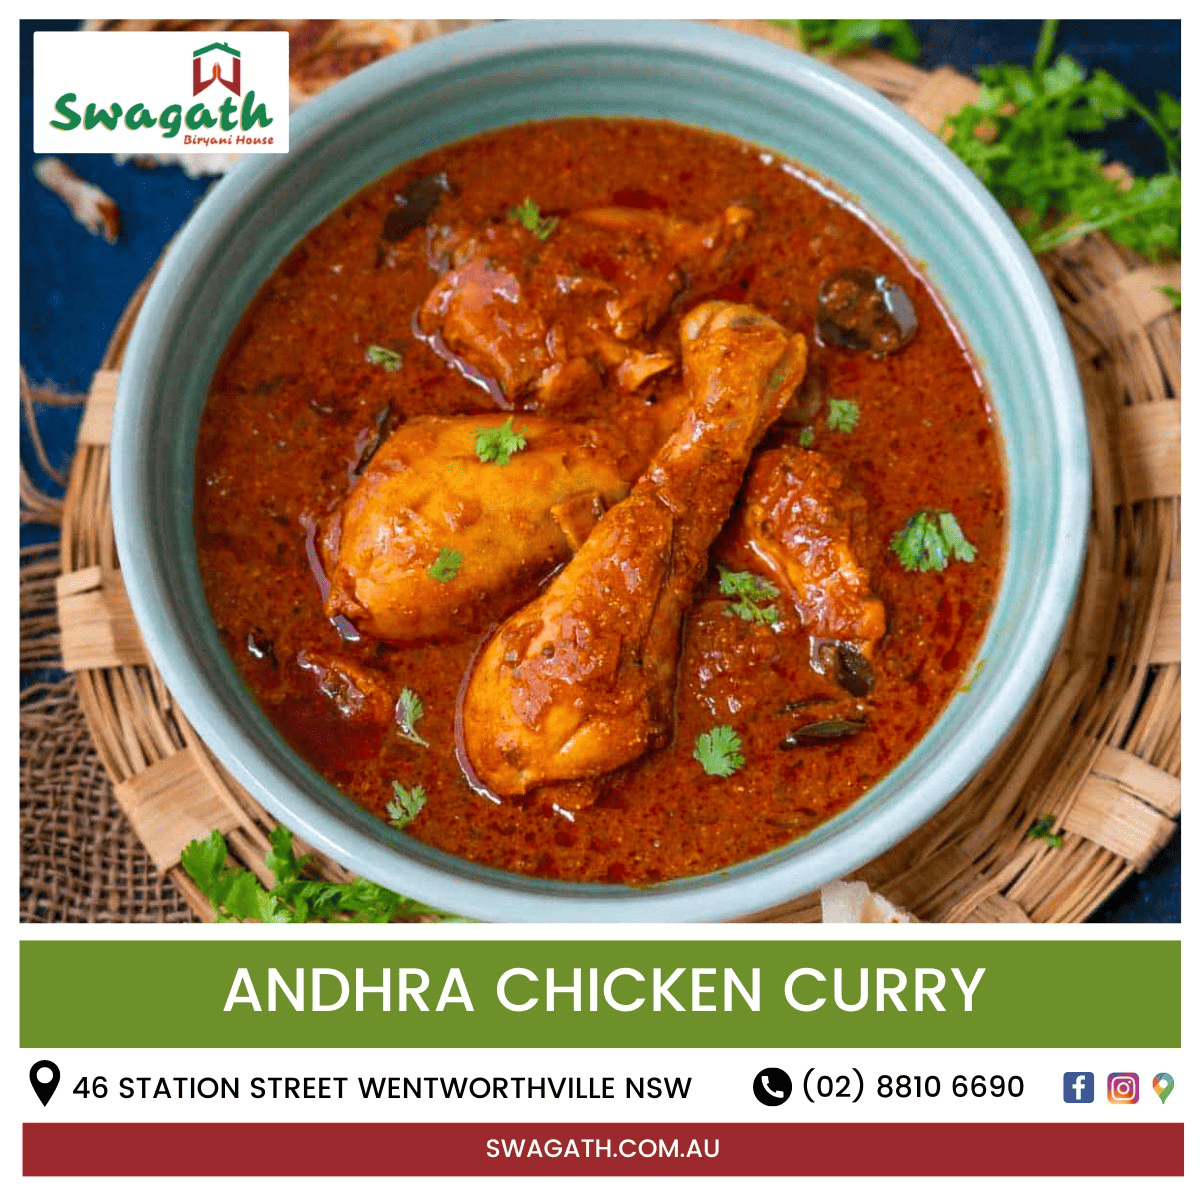 Andhra Chicken Curry - A spicy and flavourful South Indian dish with tender chicken pieces.